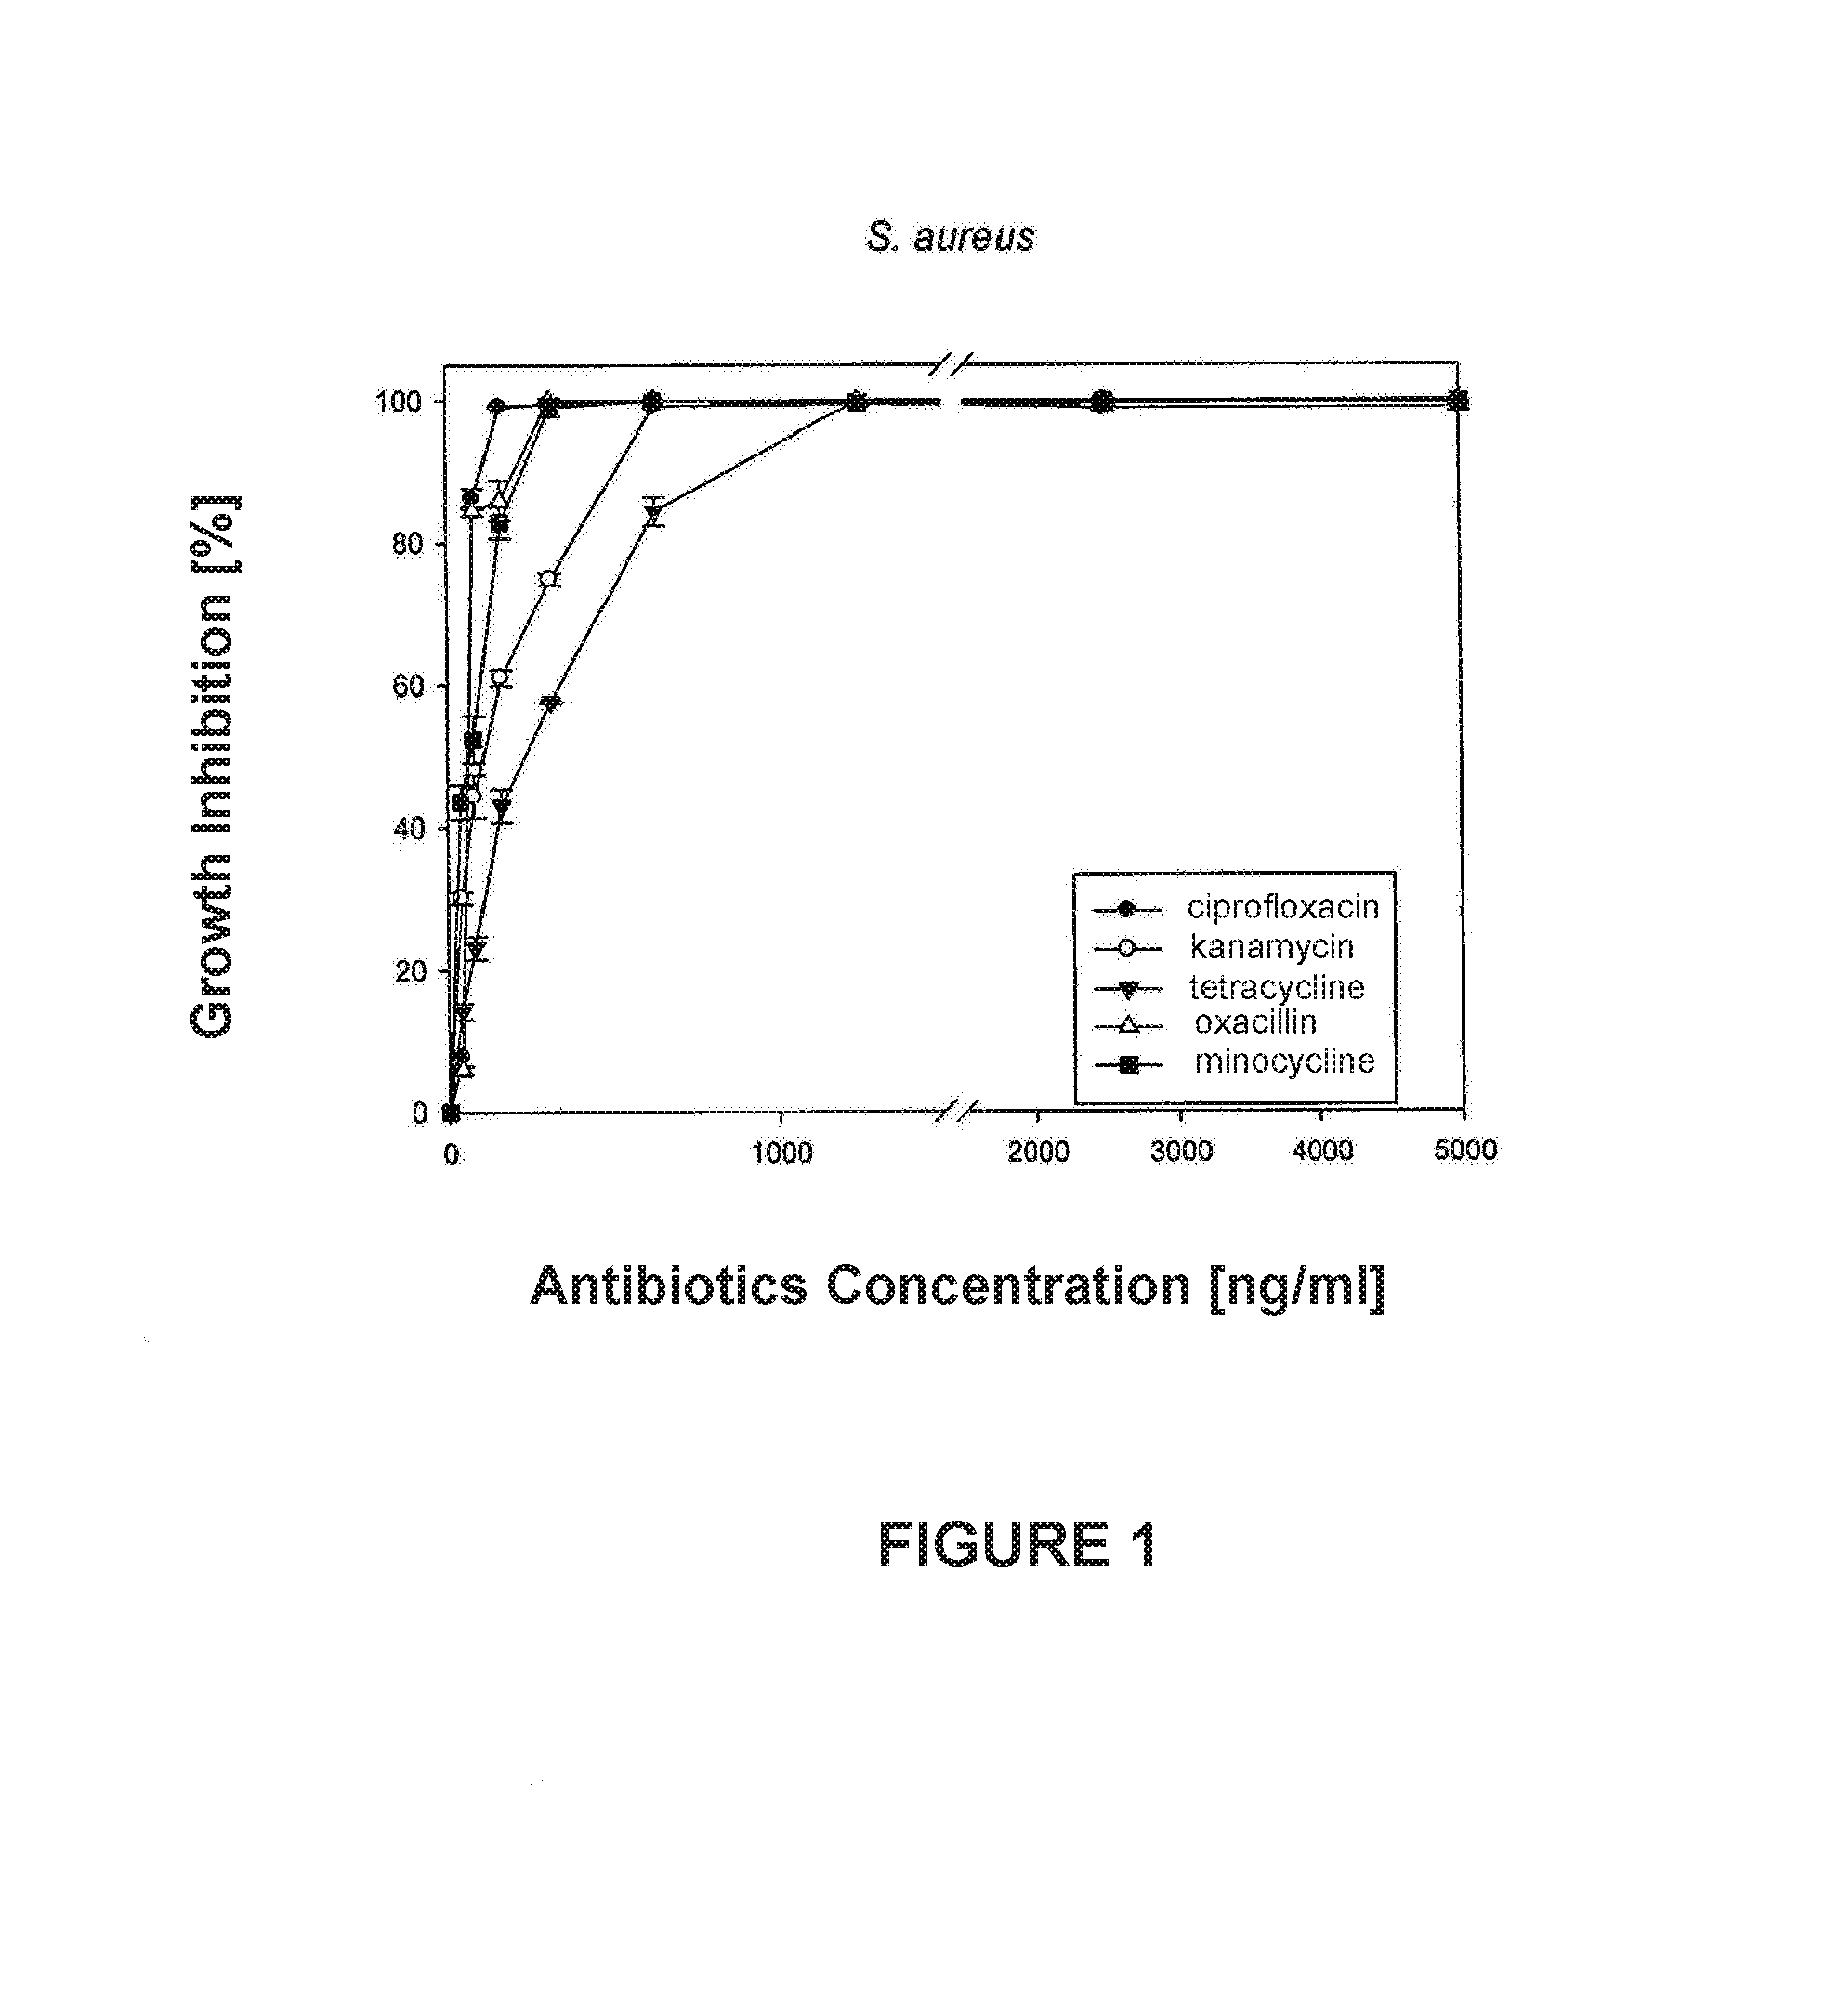 Method for the microbiological determination of traces of antibiotics in low volume biological samples